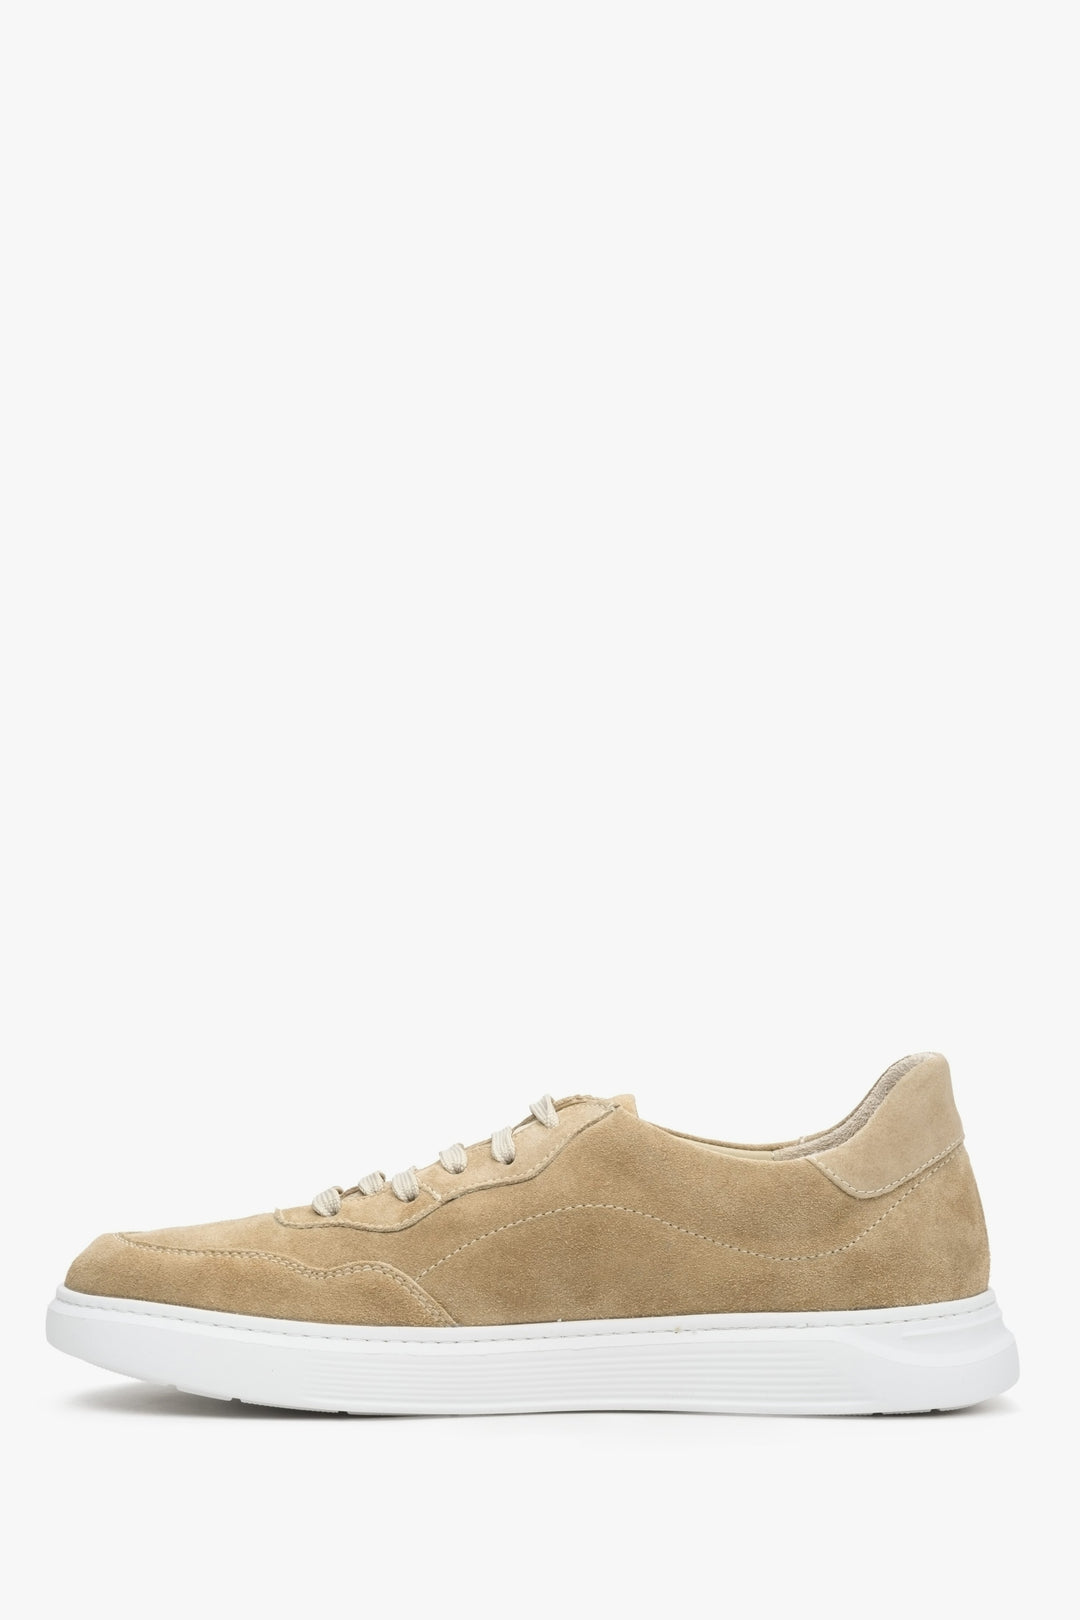 Men's sneakers made of natural velour in sand beige color, laced.